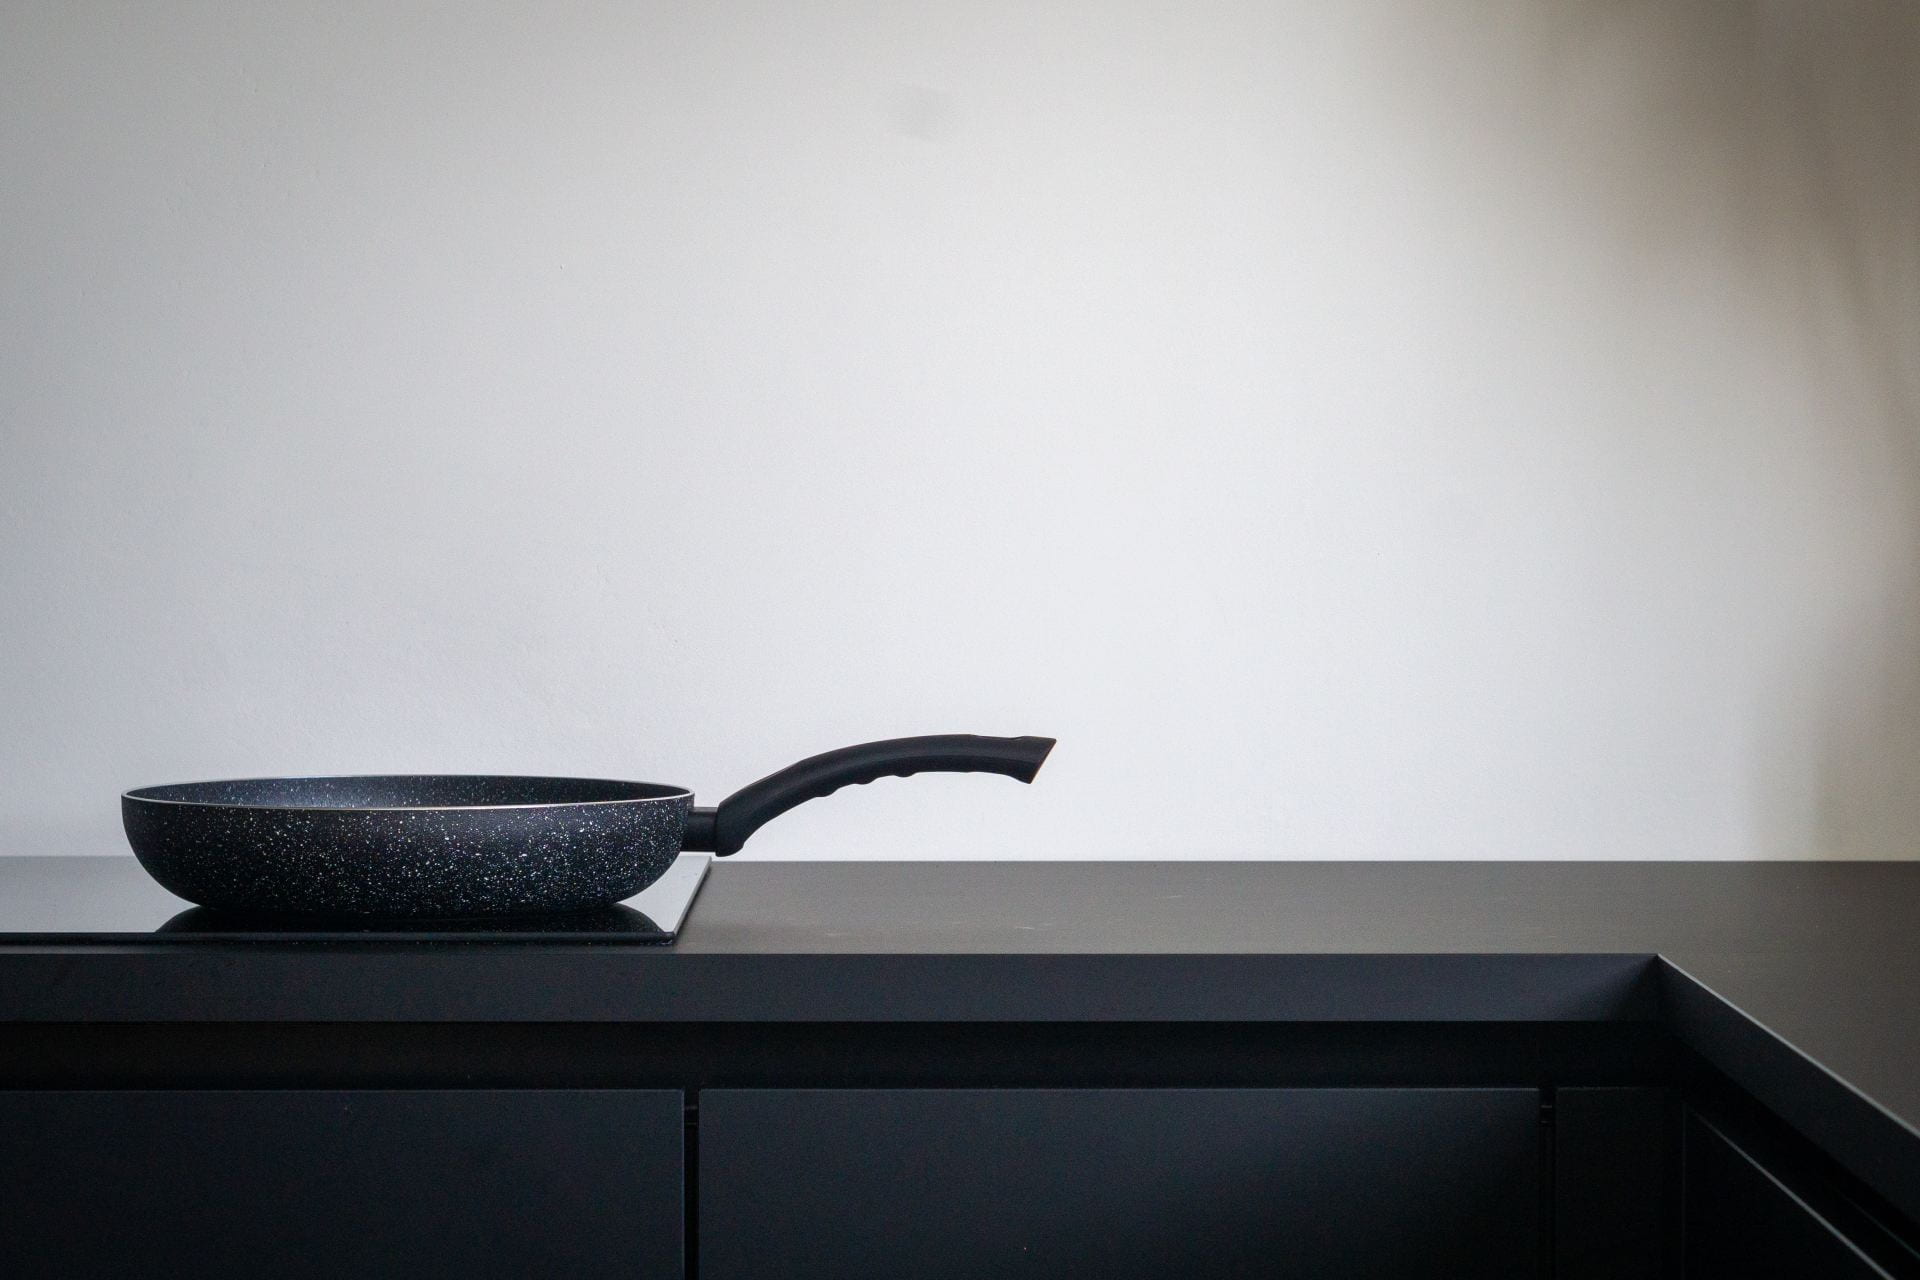 An image of a sleek, black induction cooktop with a black skillet on it